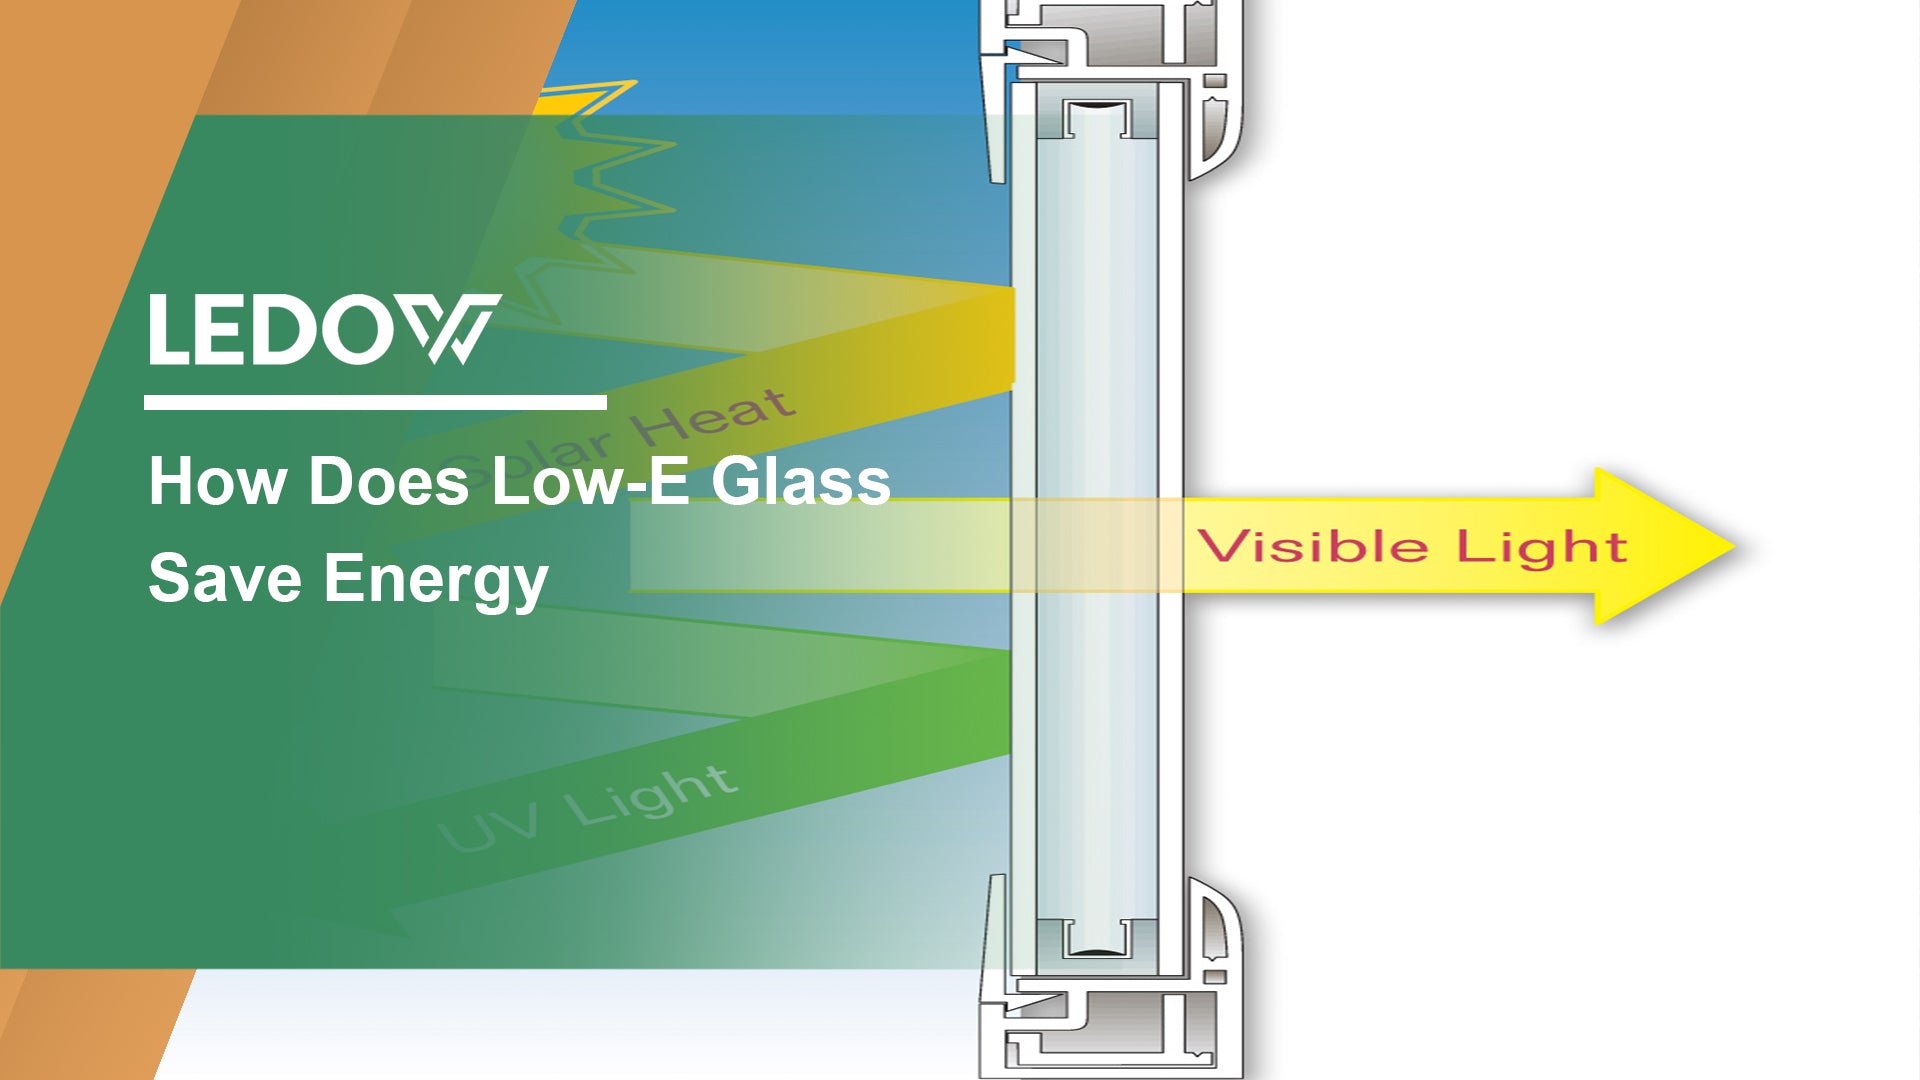 How Does Low-E Glass Save Energy?